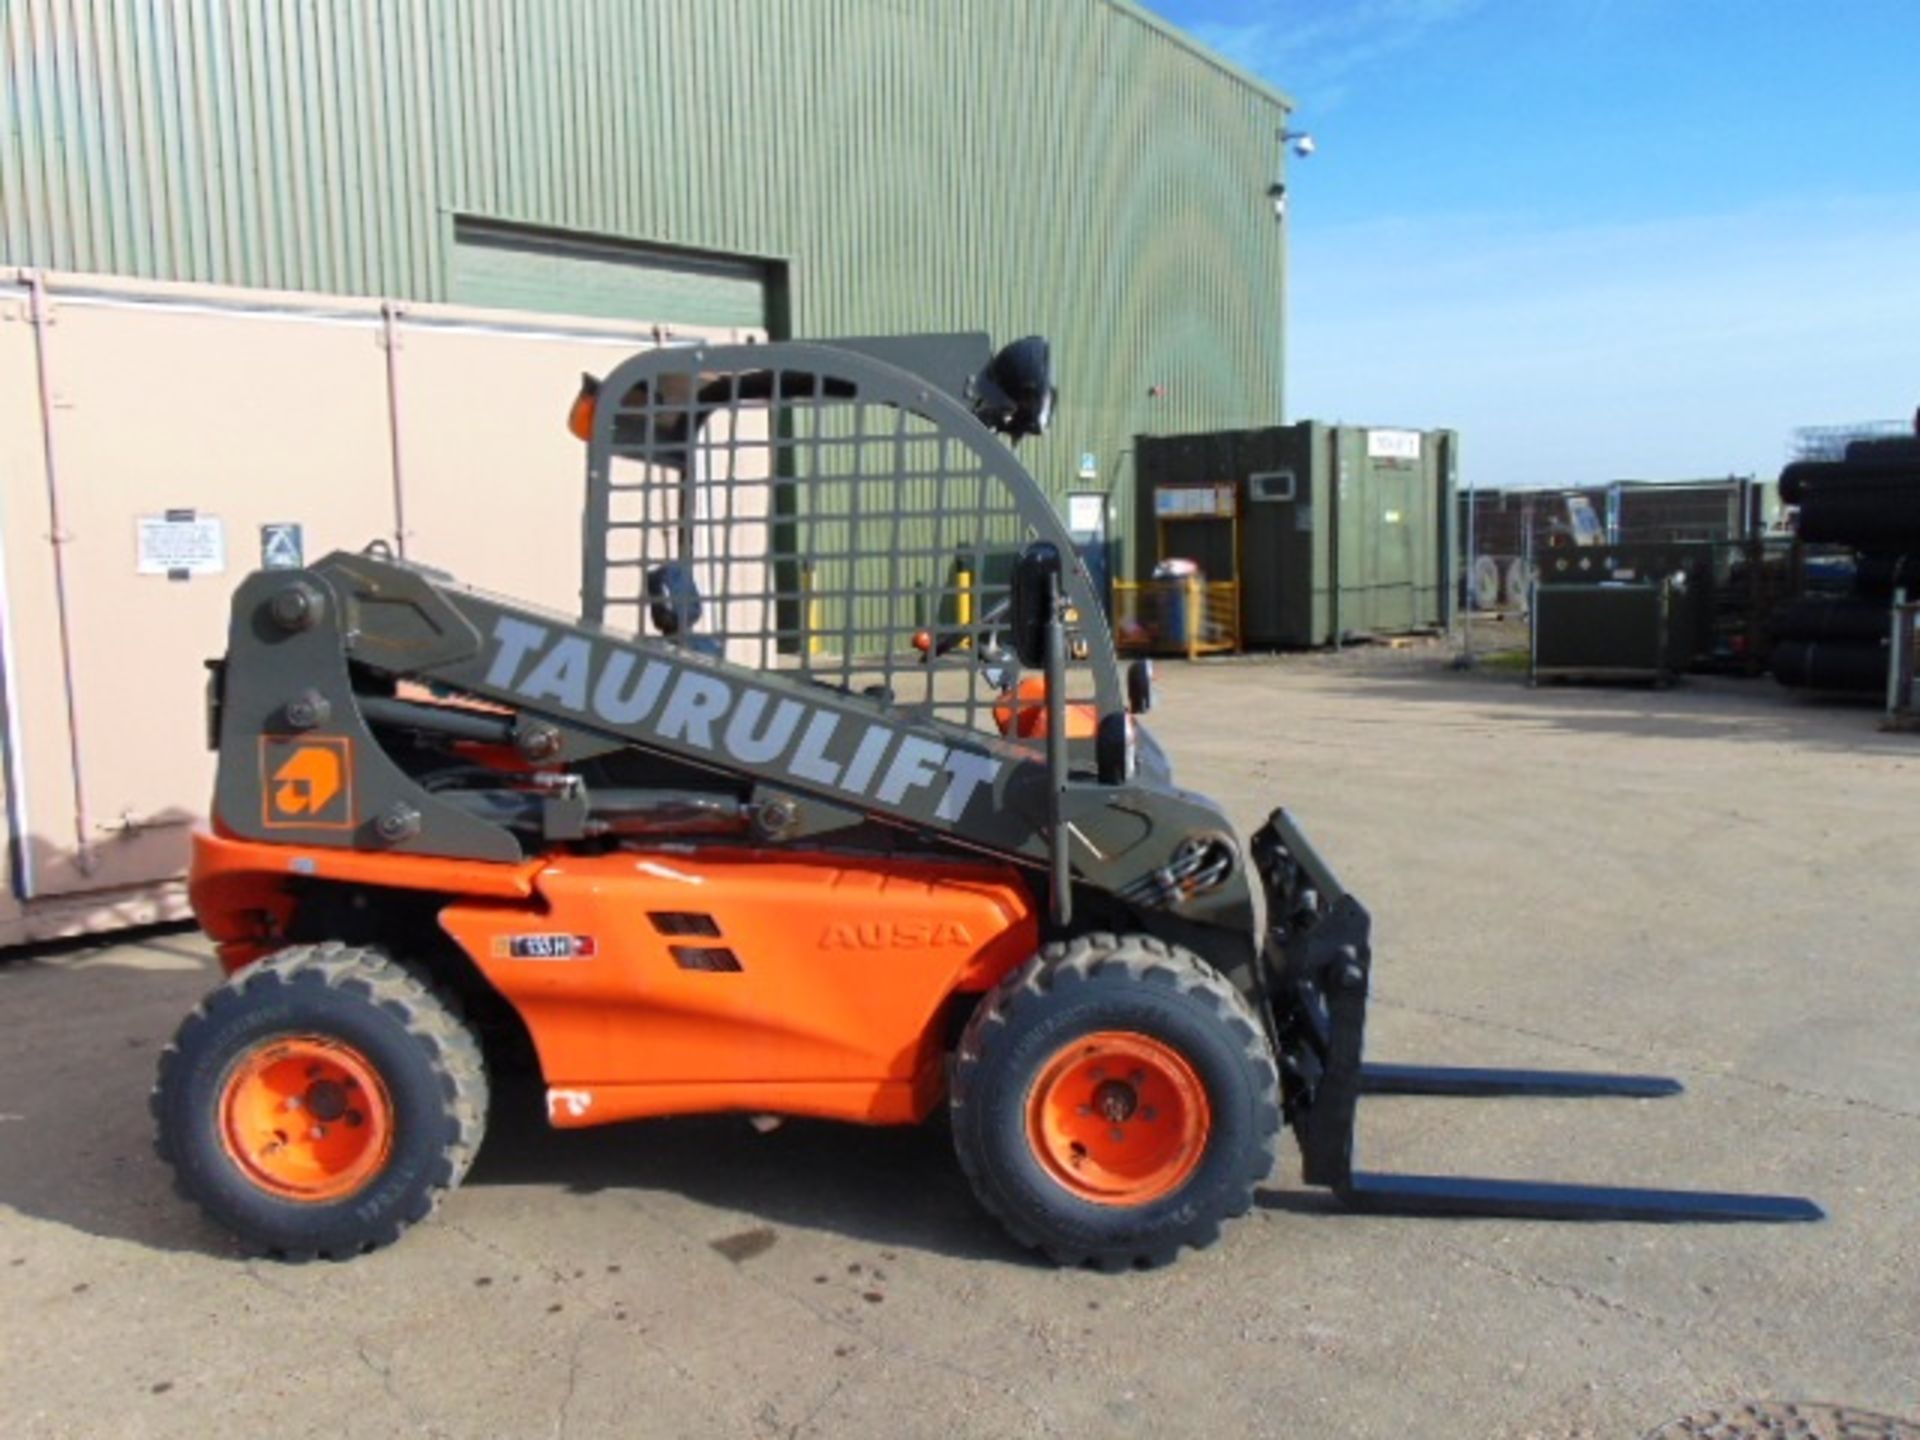 2010 Ausa Taurulift T133H 4WD Compact Forklift with Pallet Tines - Image 5 of 23